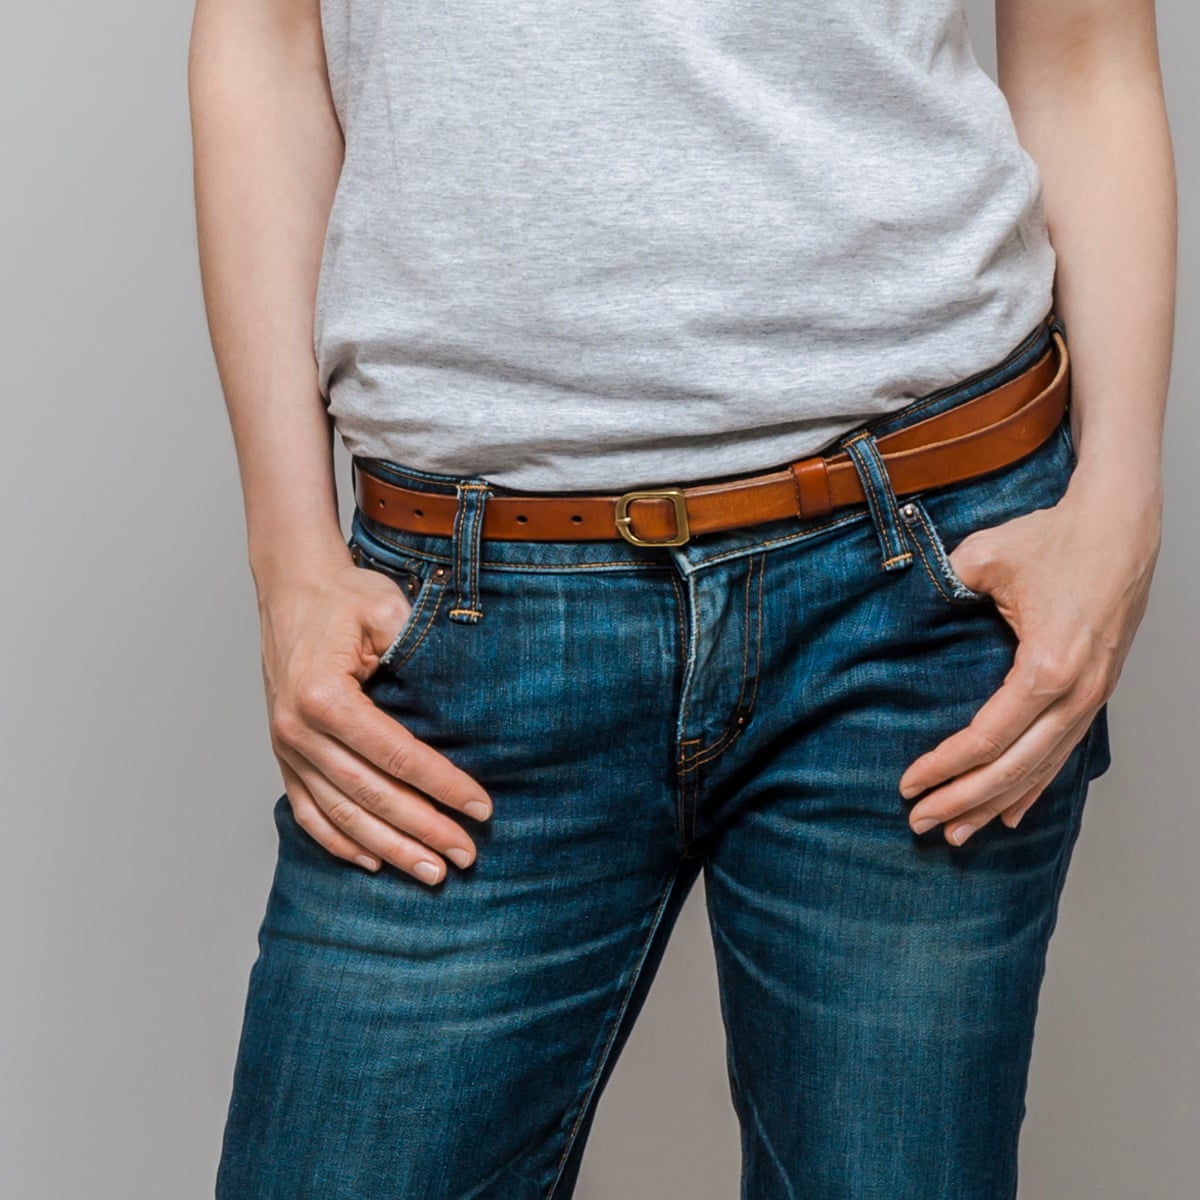 When it comes to women's pockets, size really does matter